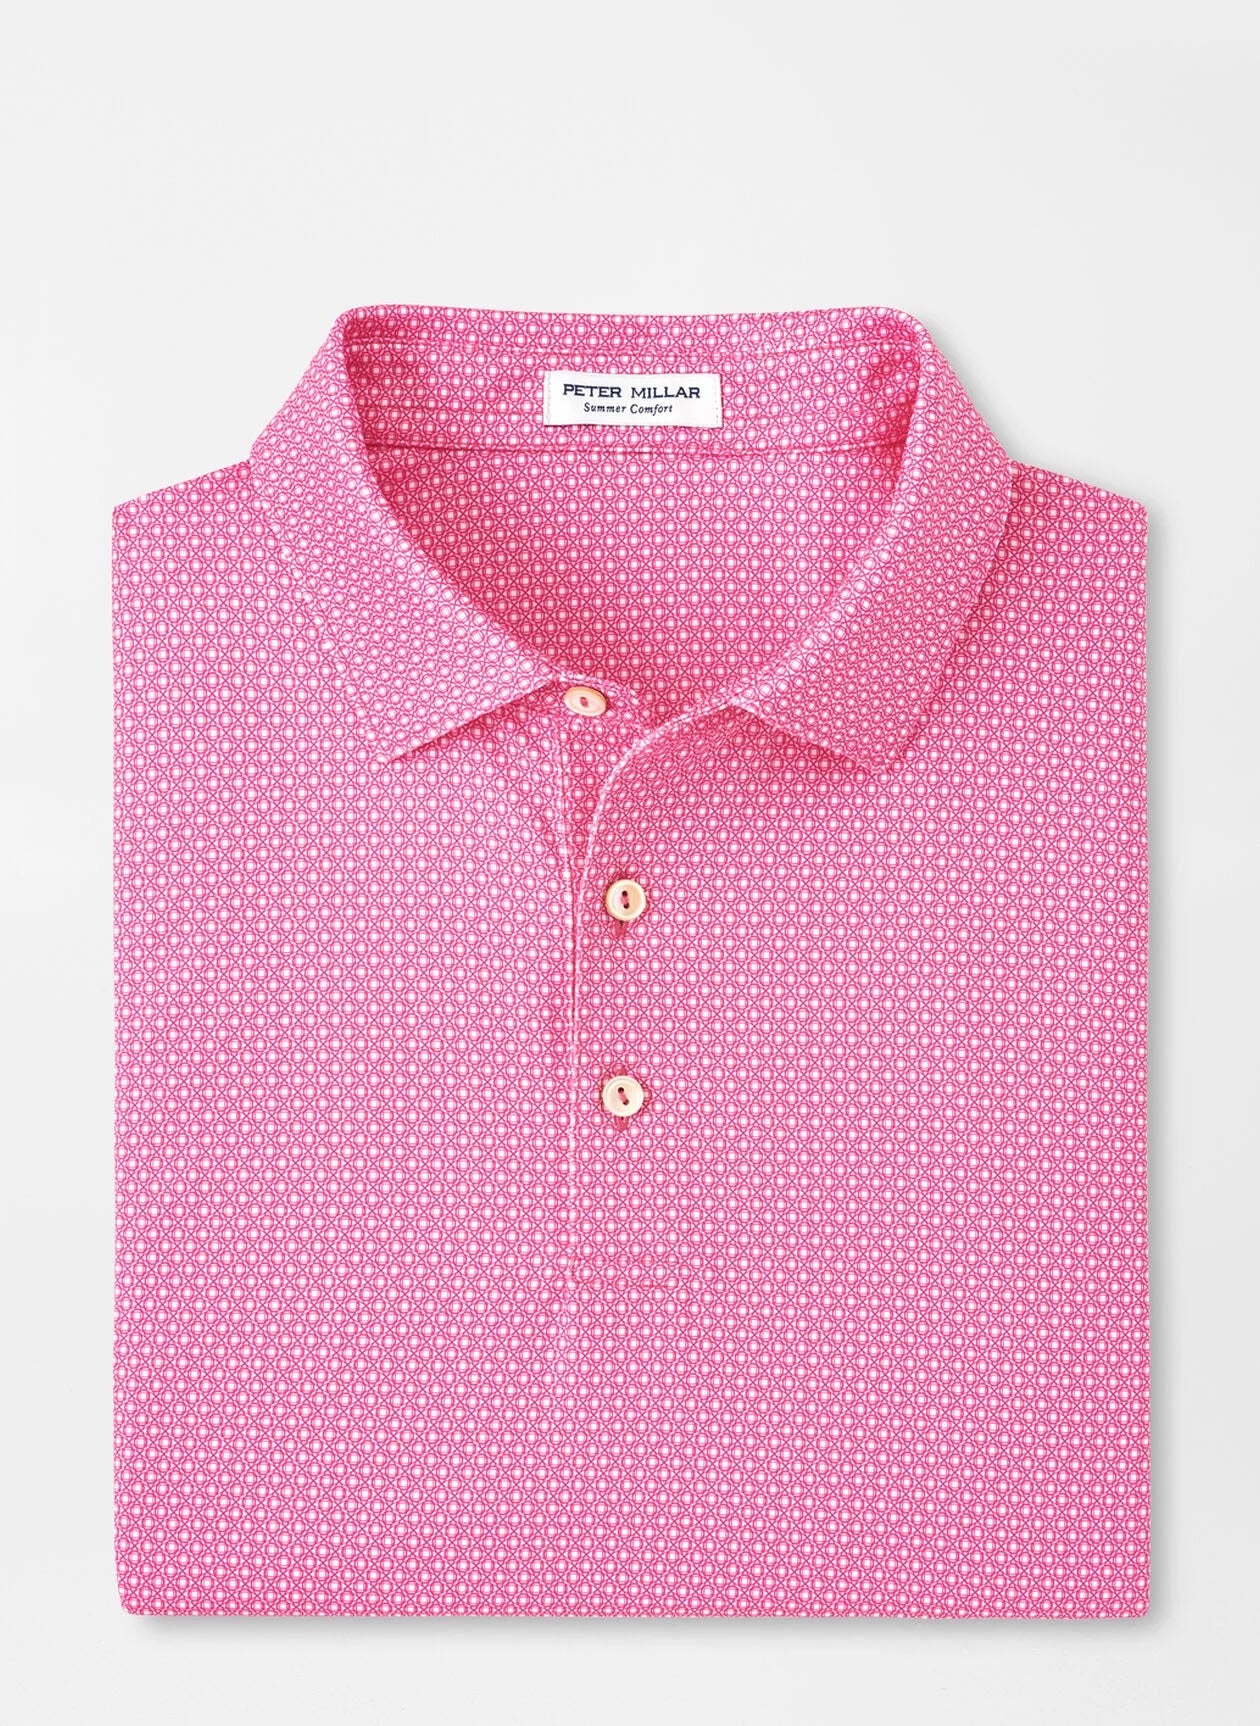 Peter Millar Tesseract Performance Jersey Polo in Pink Ruby